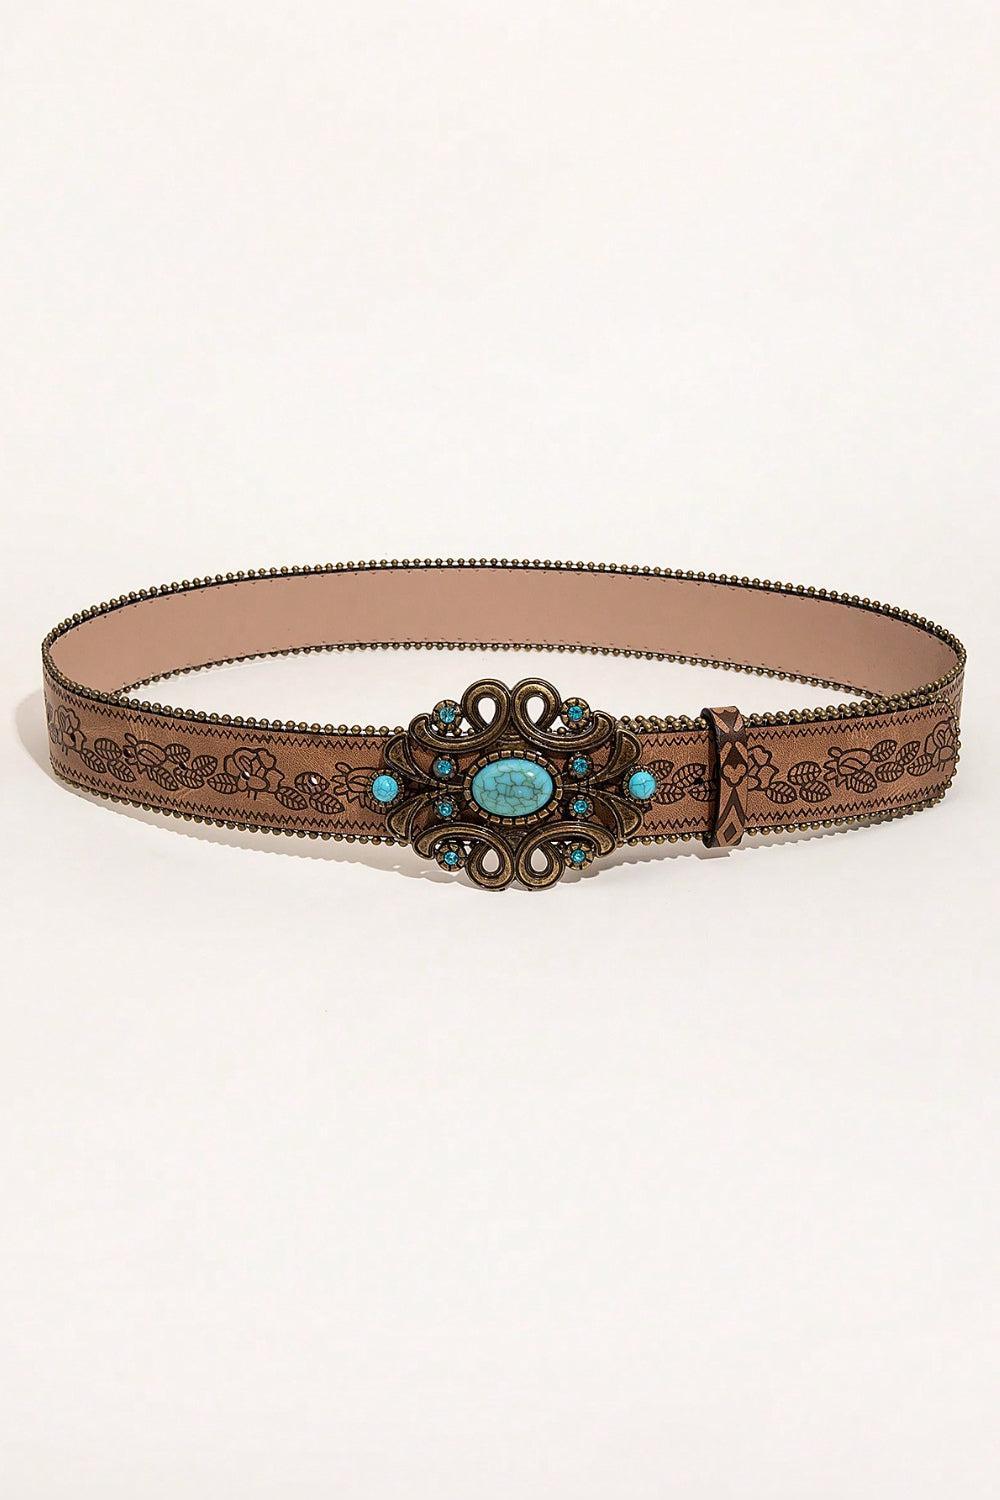 a belt with a turquoise stone in the center